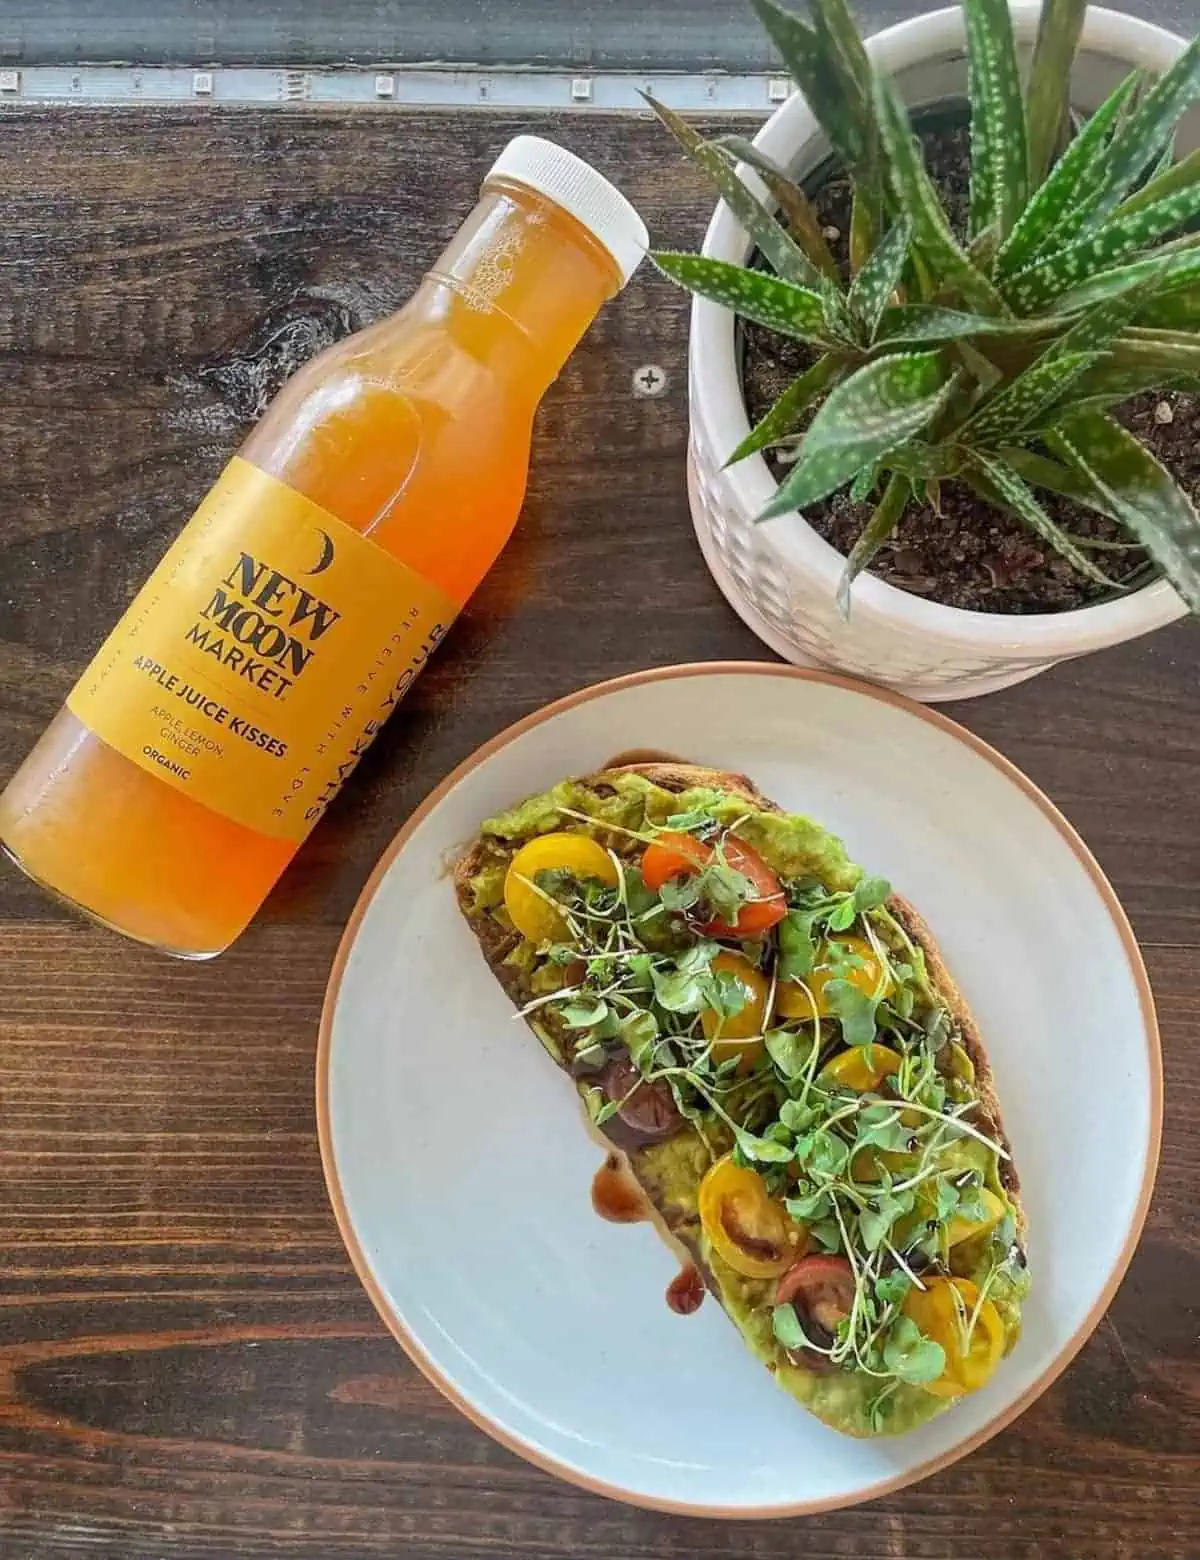 Avocado toast and cold-pressed juice from New Moon Market in Orlando.